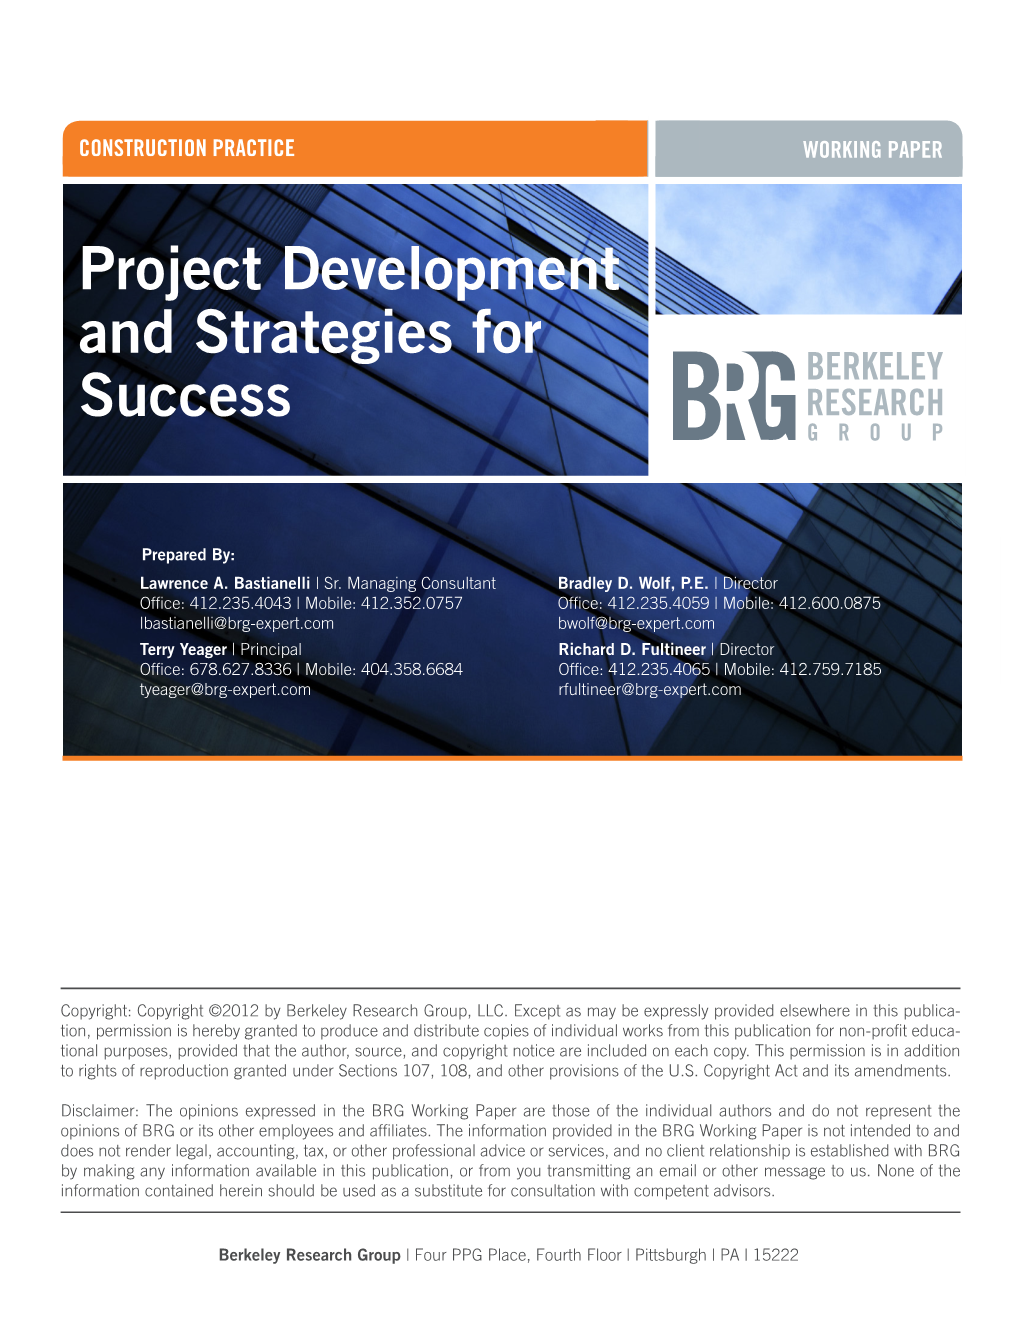 Project Development and Strategies for Success